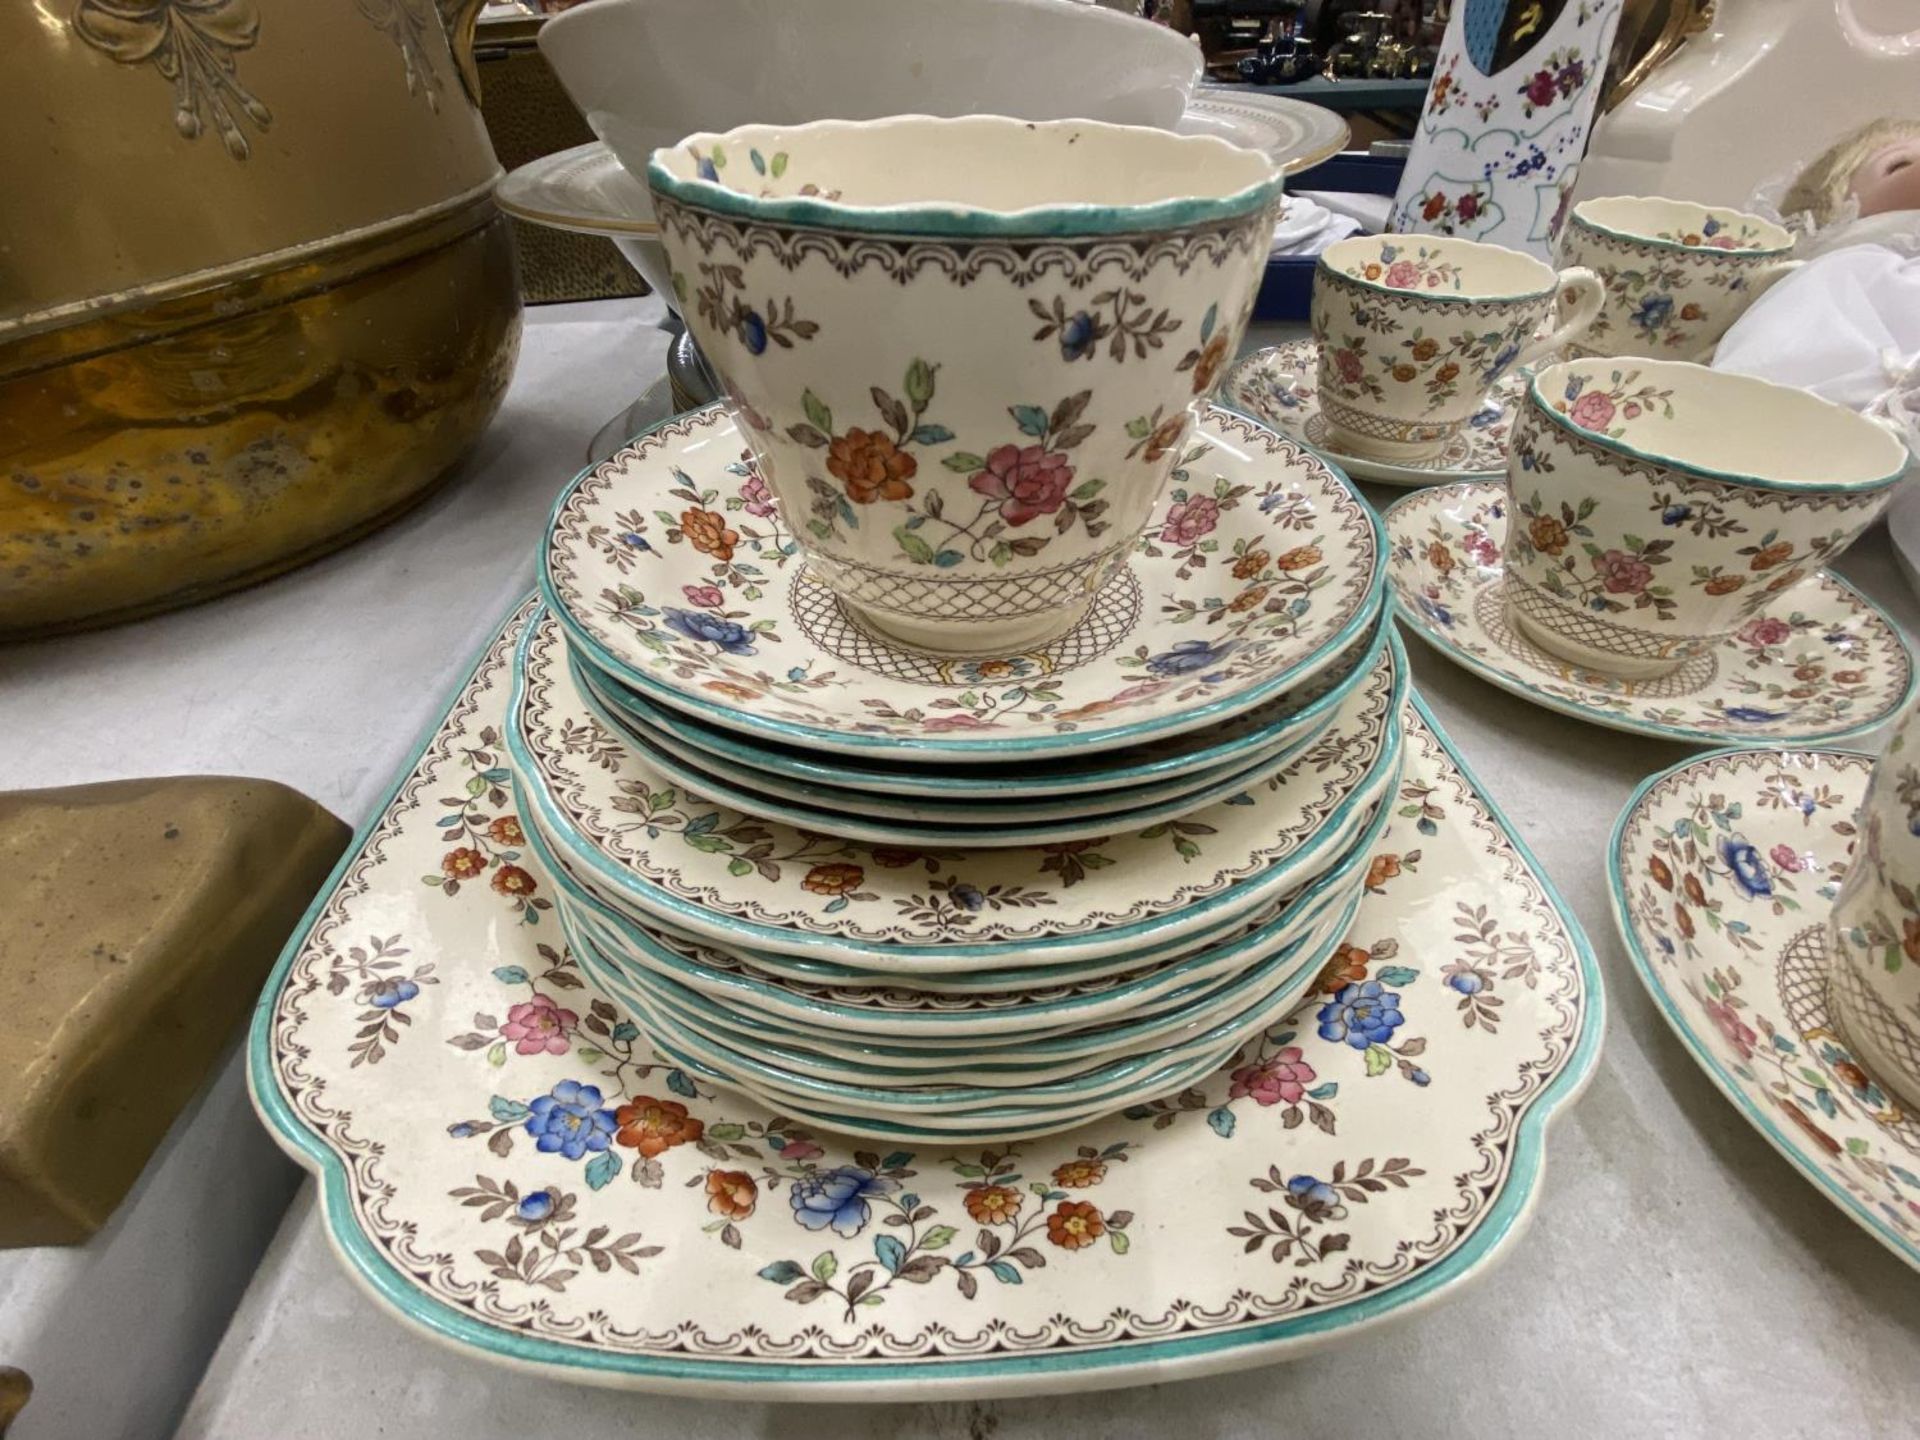 A QUANTITY OF VINTAGE TEAWARE TO INCLUDE COPELAND SPODE 'ROYAL JASMINE' CAKE PLATE, CUPS, SAUCERS - Image 2 of 5